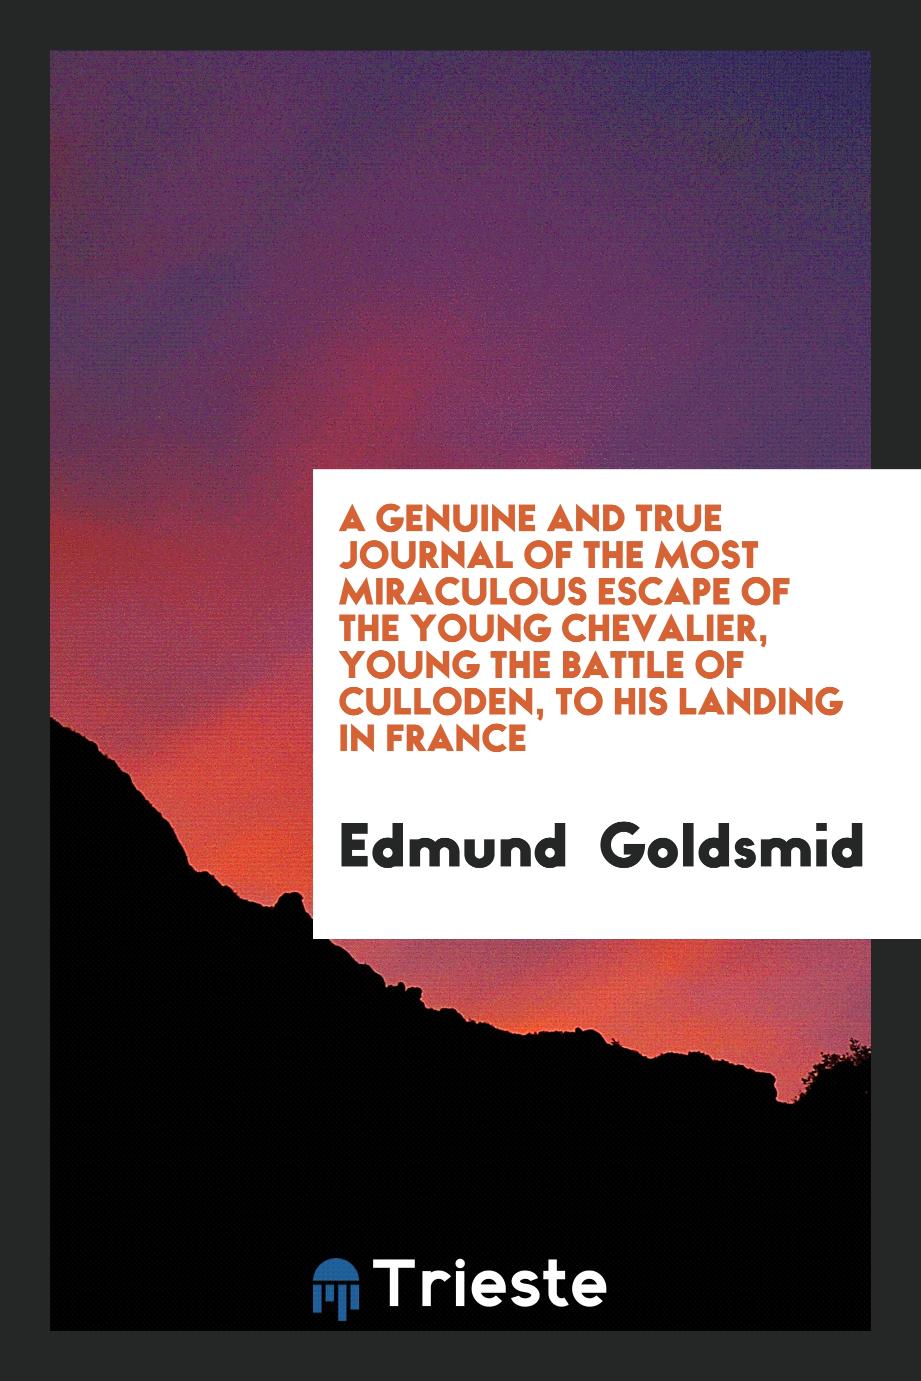 A Genuine and True Journal of the Most Miraculous Escape of the Young Chevalier, Young the Battle of Culloden, to His Landing in France